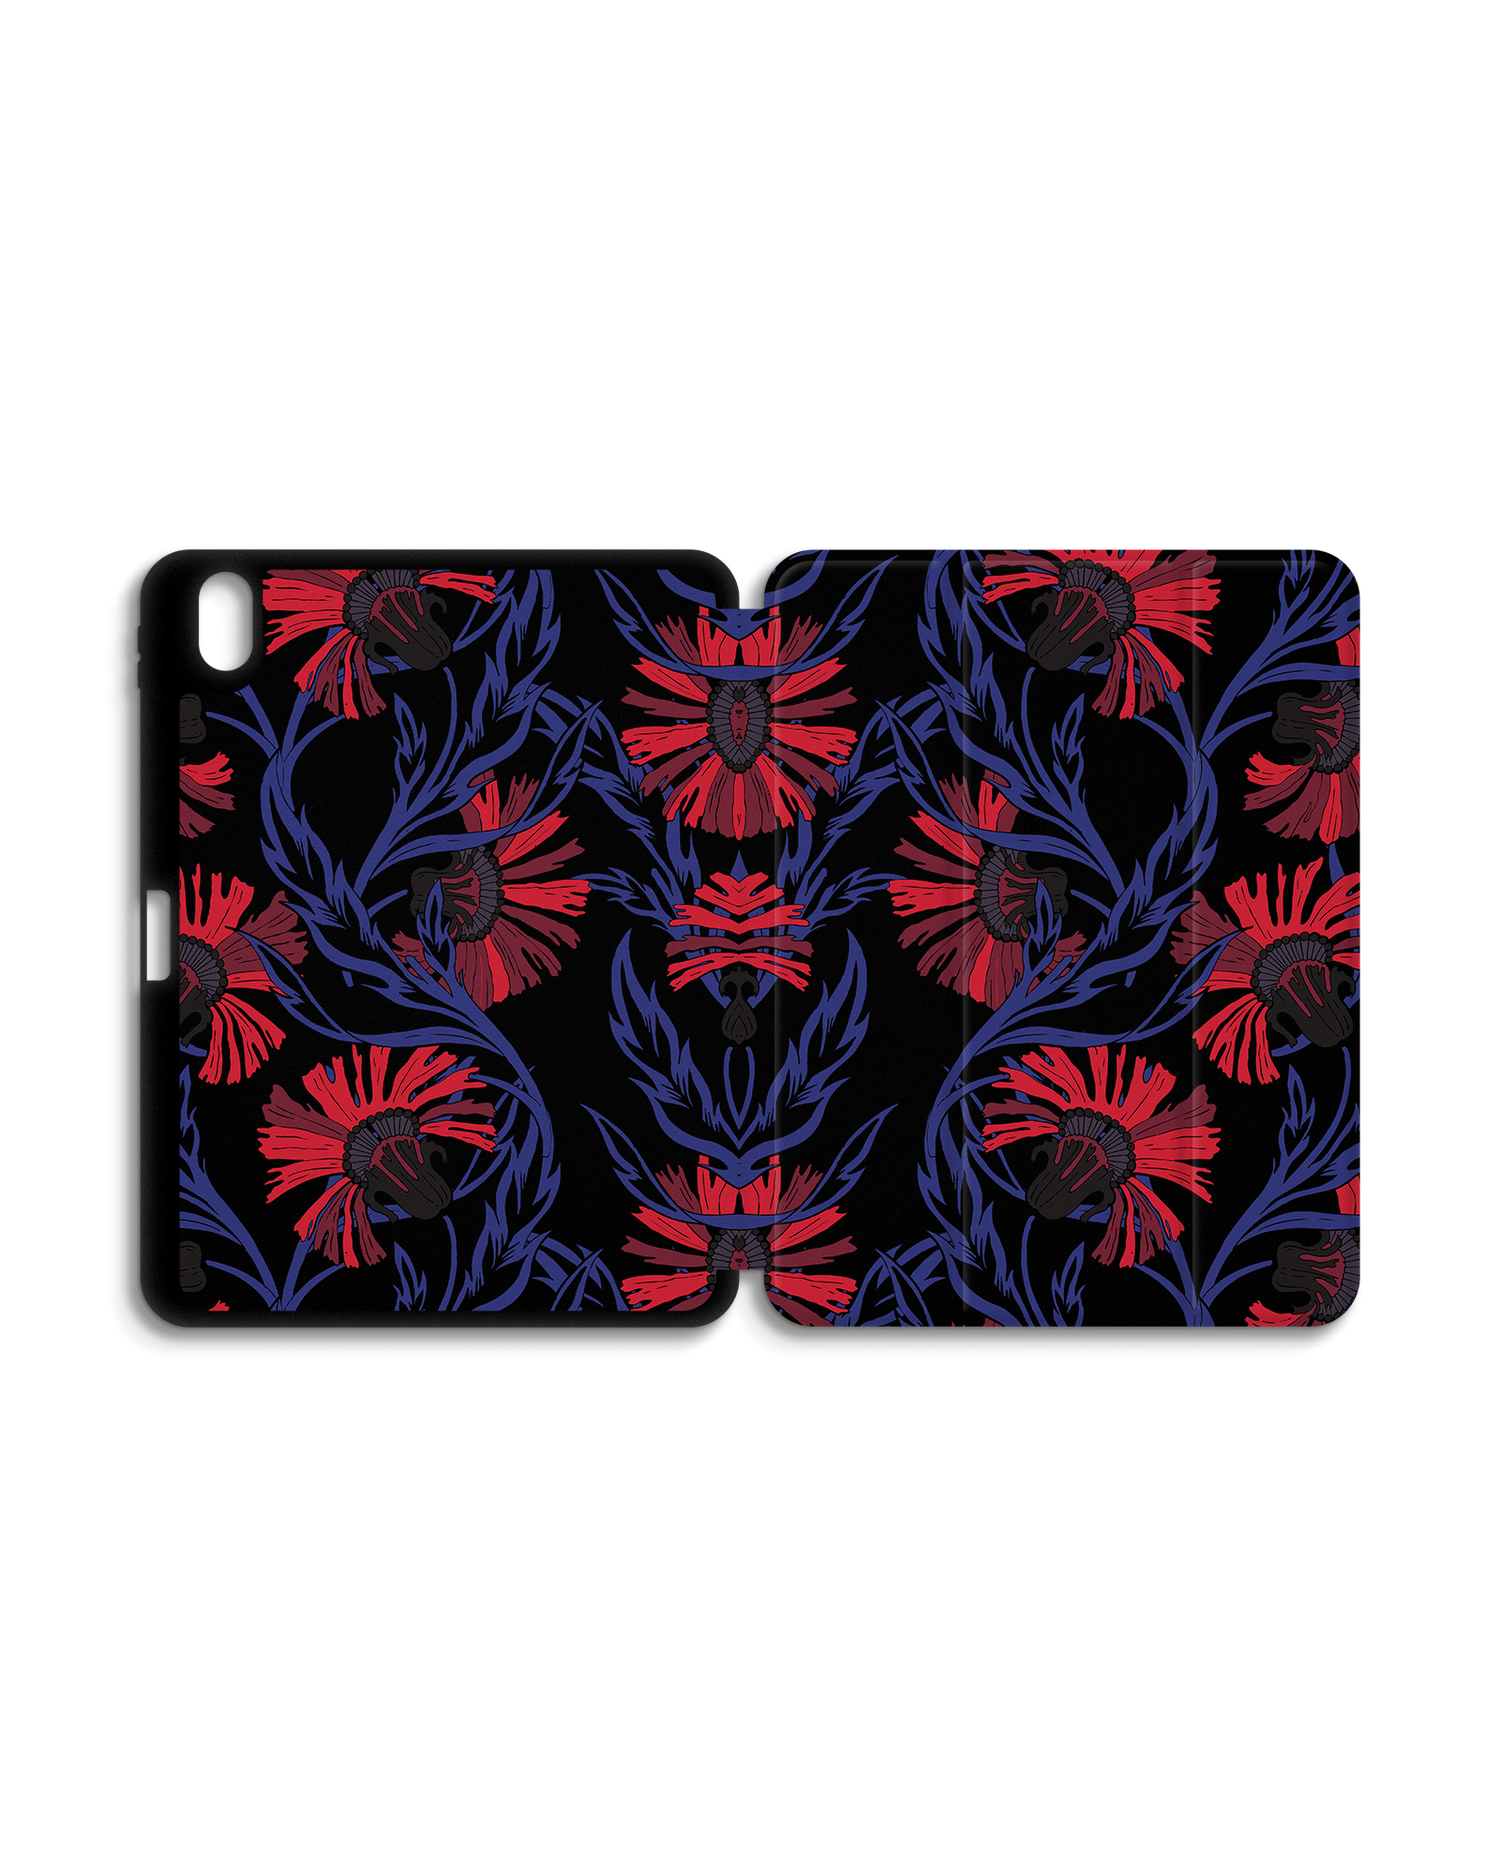 Midnight Floral iPad Case with Pencil Holder for Apple iPad (10th Generation): Opened exterior view